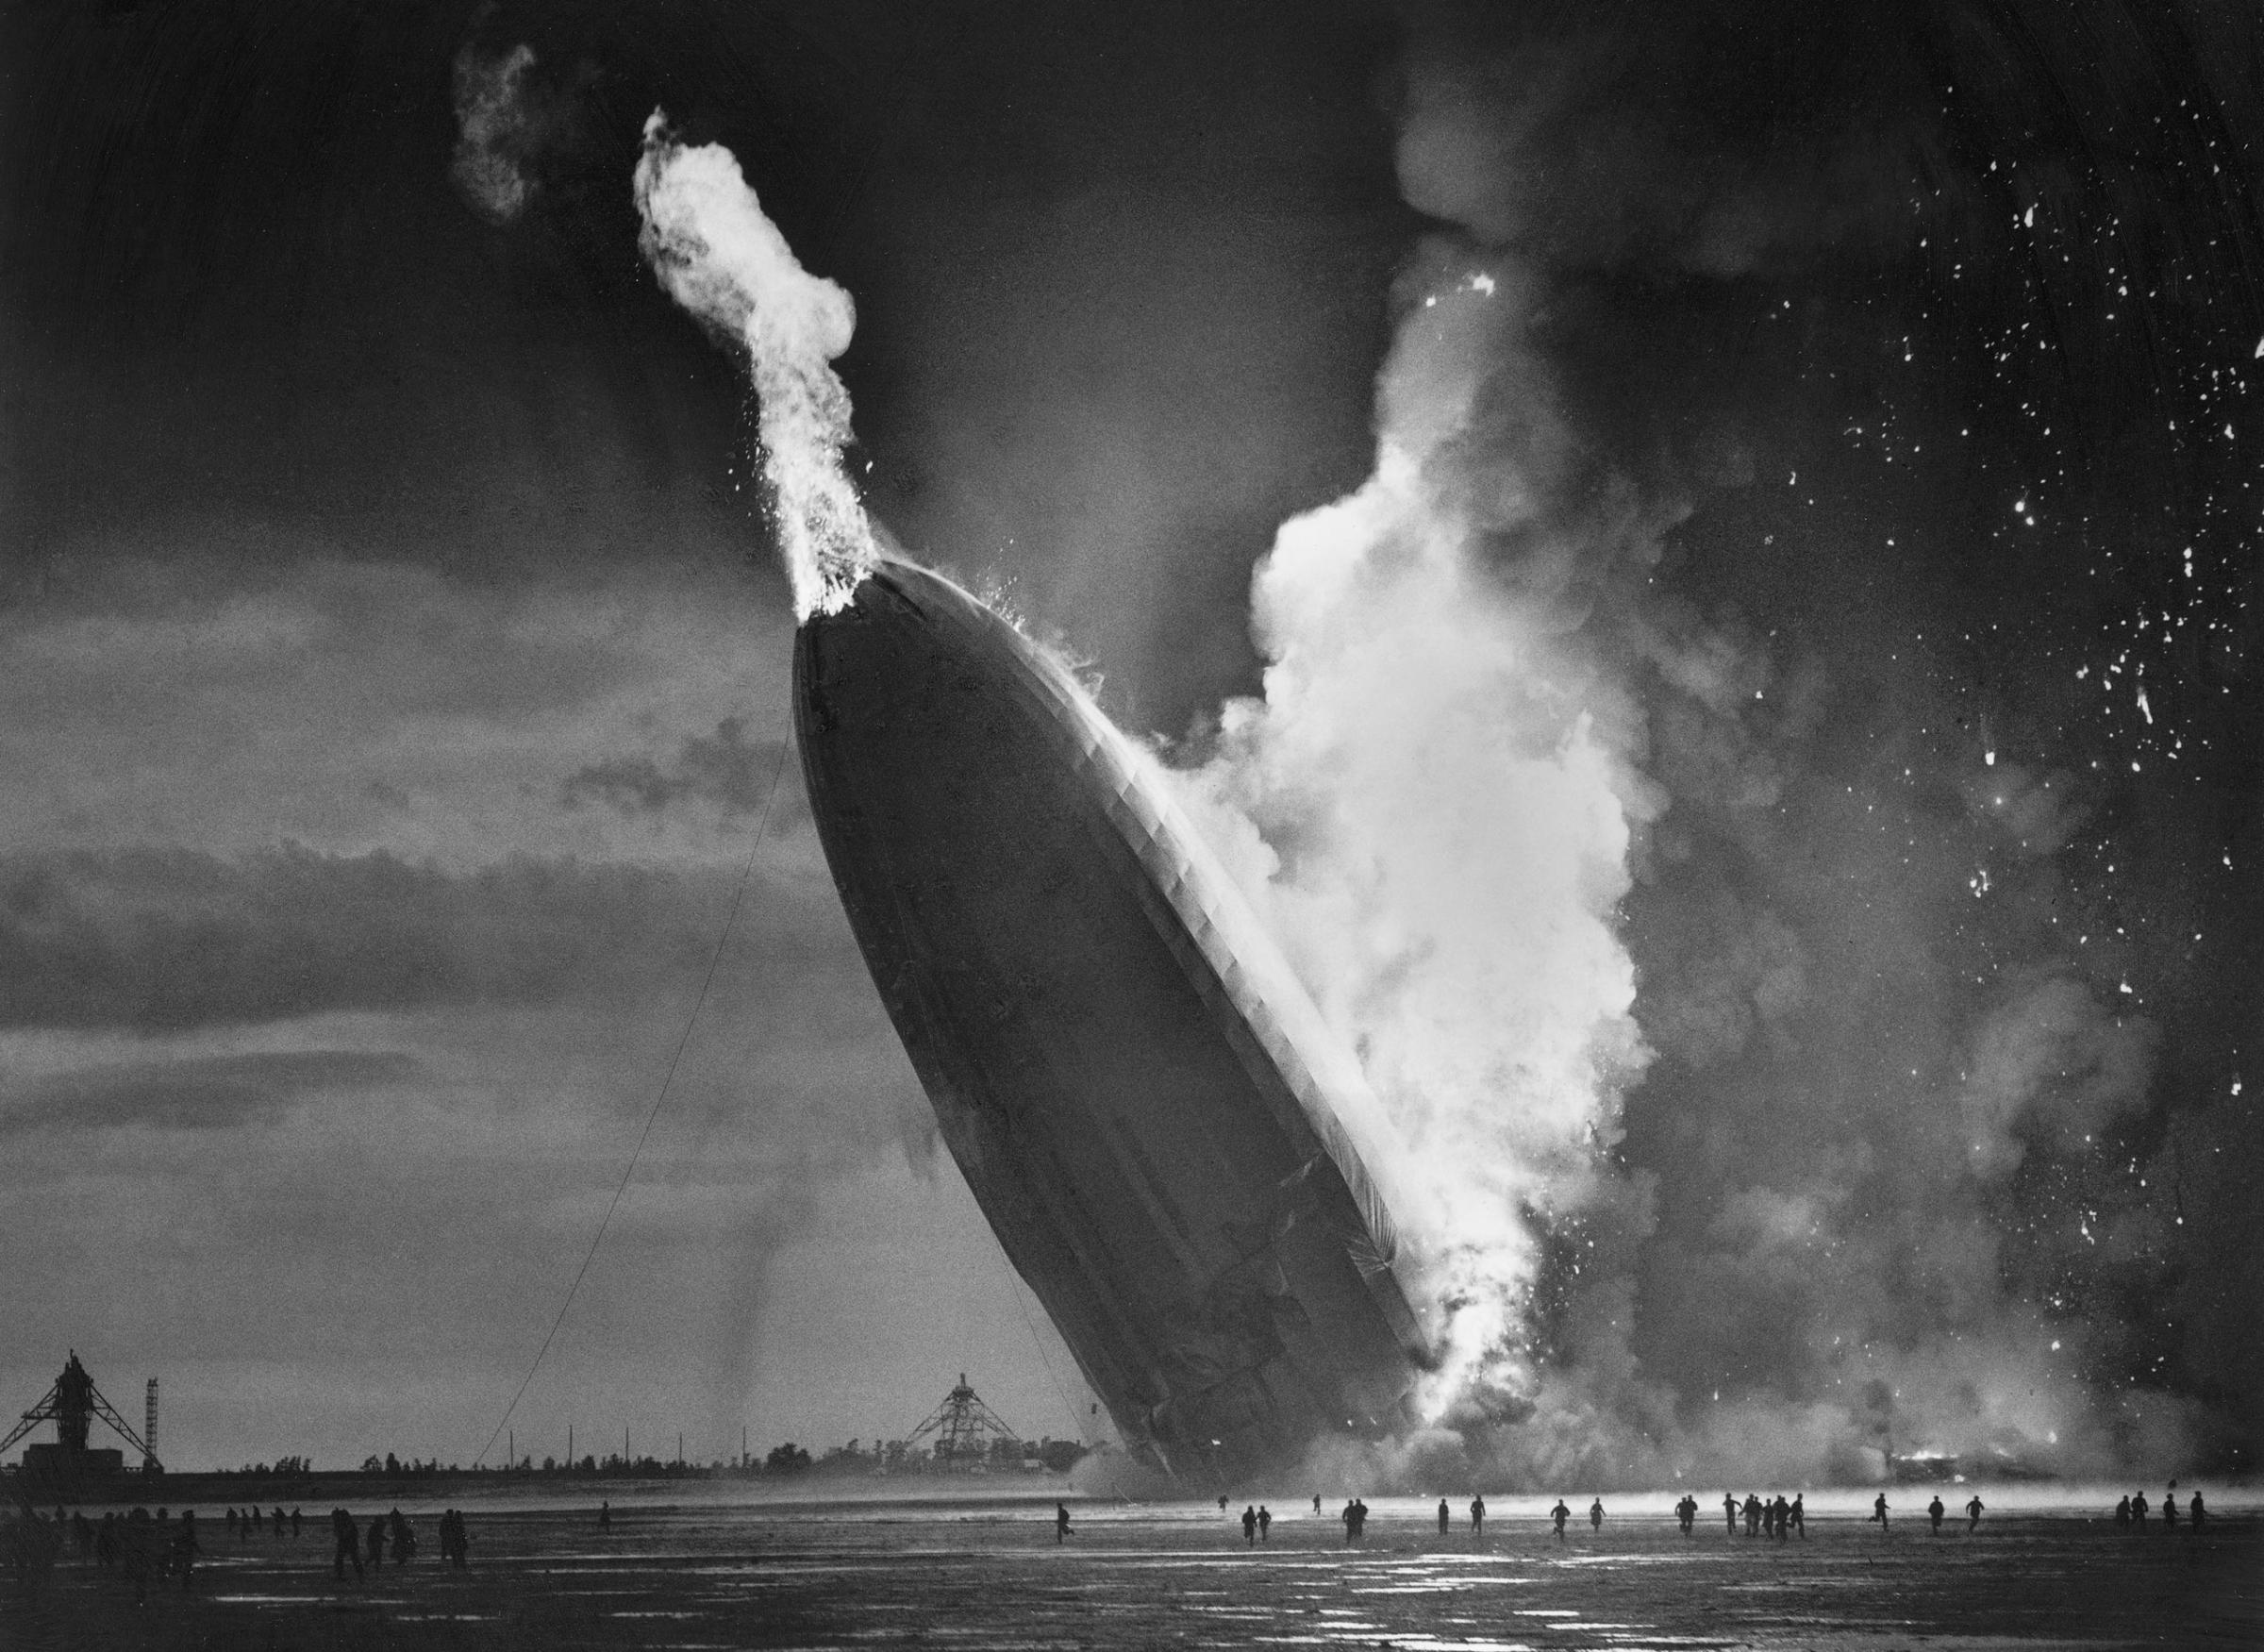 The German dirigible Hindenburg crashes to earth, tail first, in flaming ruins after exploding on May 6, 1937, at the U.S. Naval Station in Lakehurst, N.J.